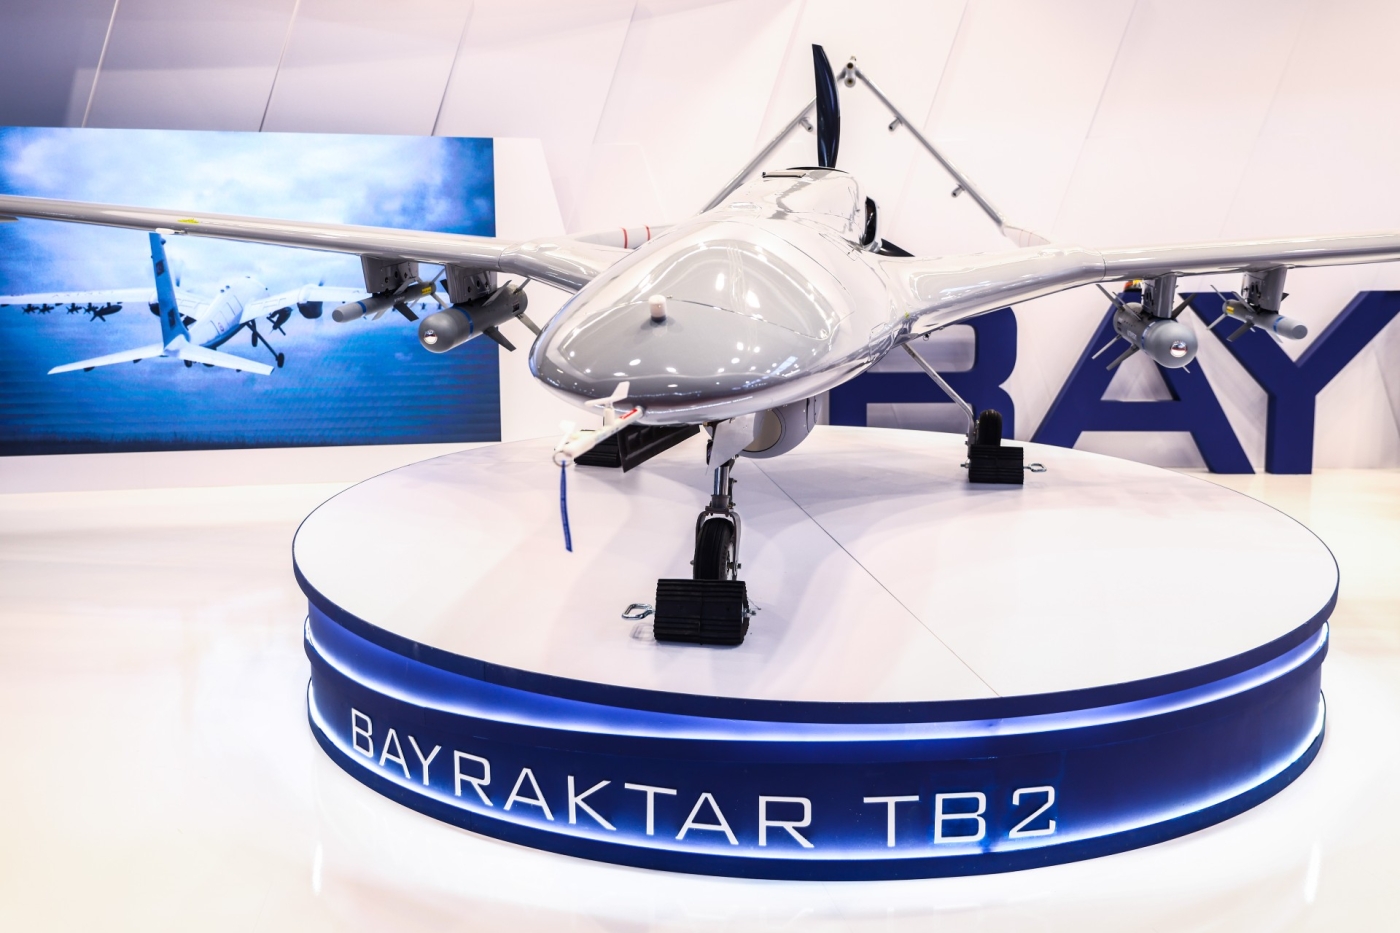 A Bayraktar TB2 drone is seen at the 30th International Defence Industry Exhibition MSPO in Kielce, Poland on 6 September 6 (Reuters)